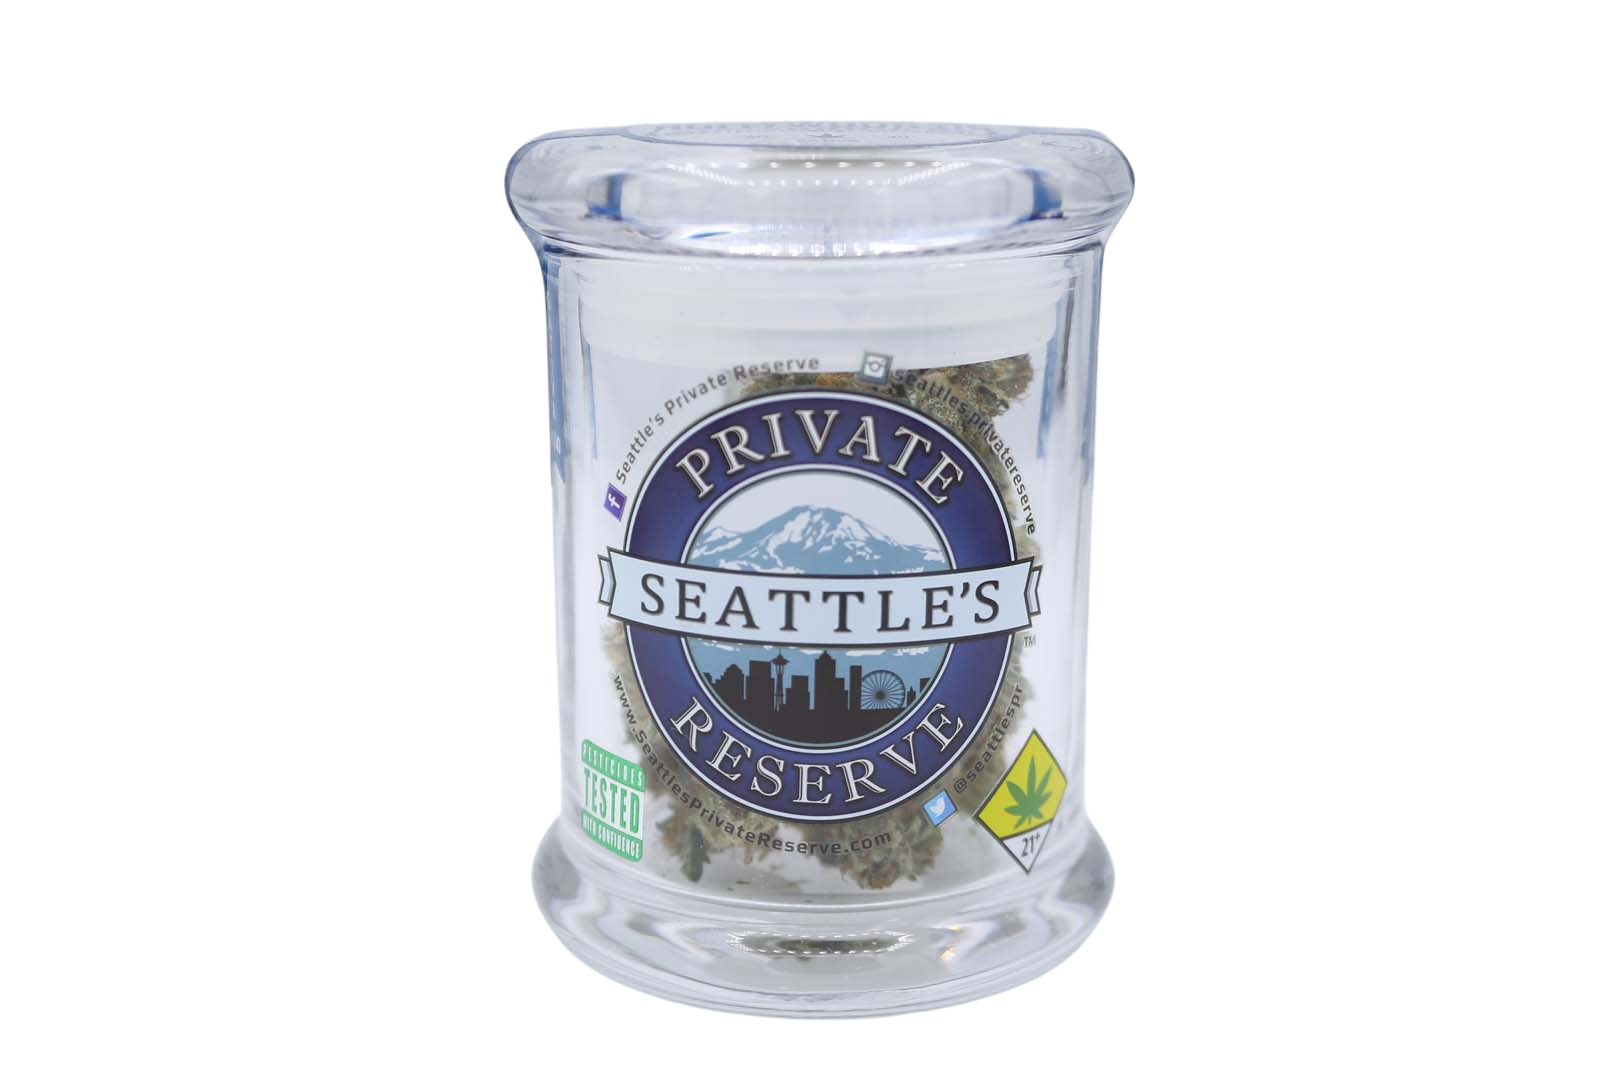 Seattles Private Reserve Big Smooth